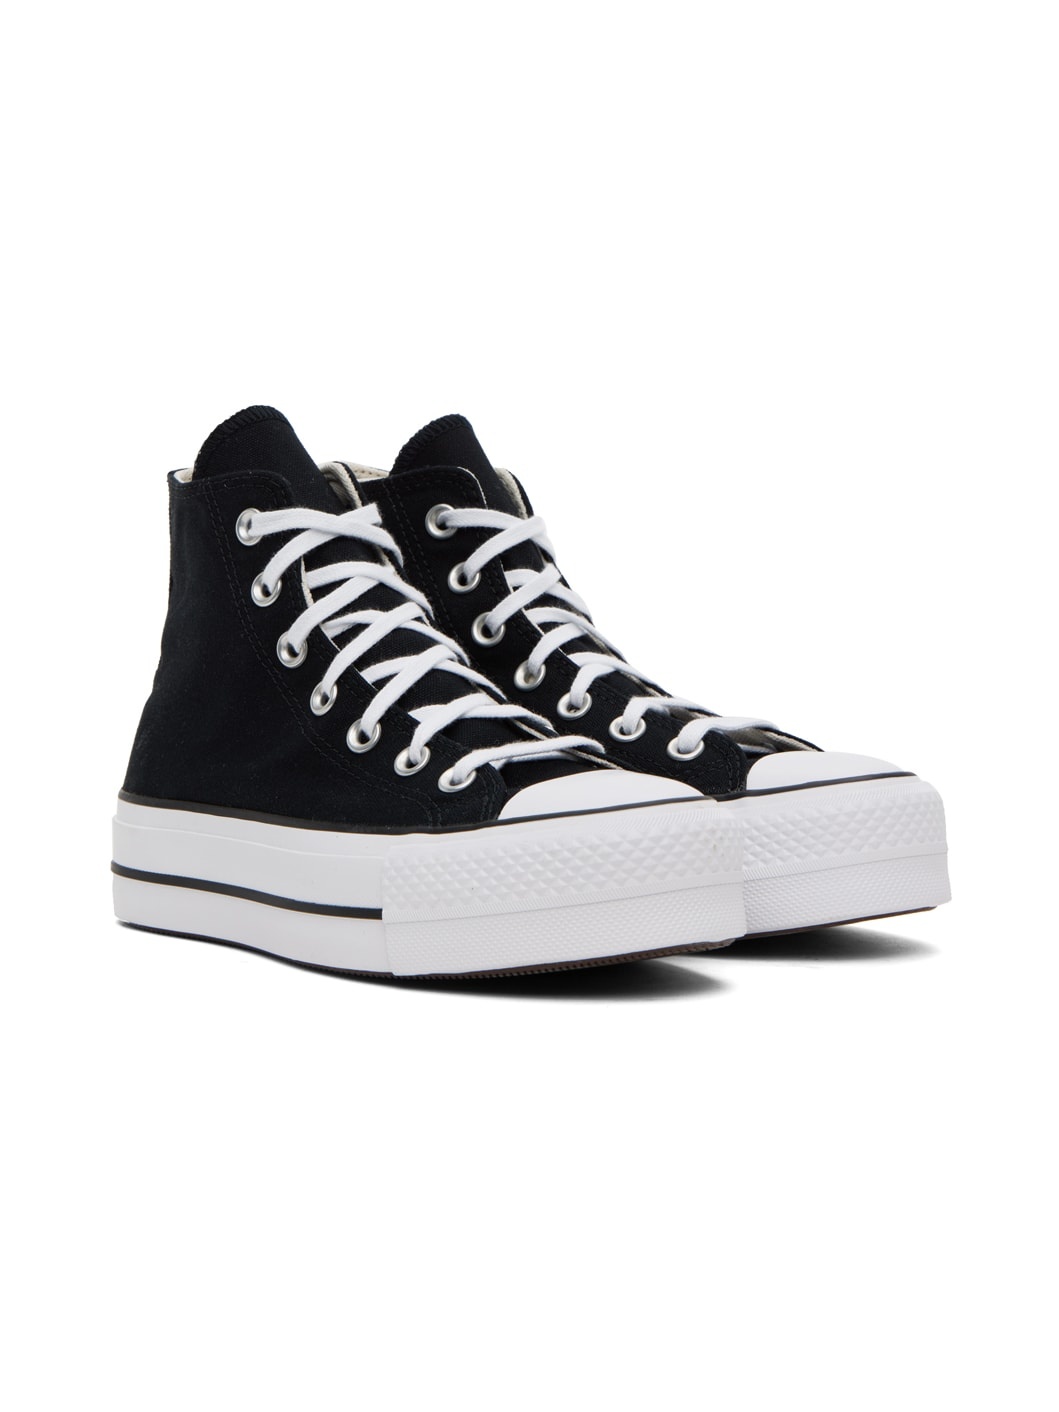 Black Chuck Taylor All Star Sneakers - 4